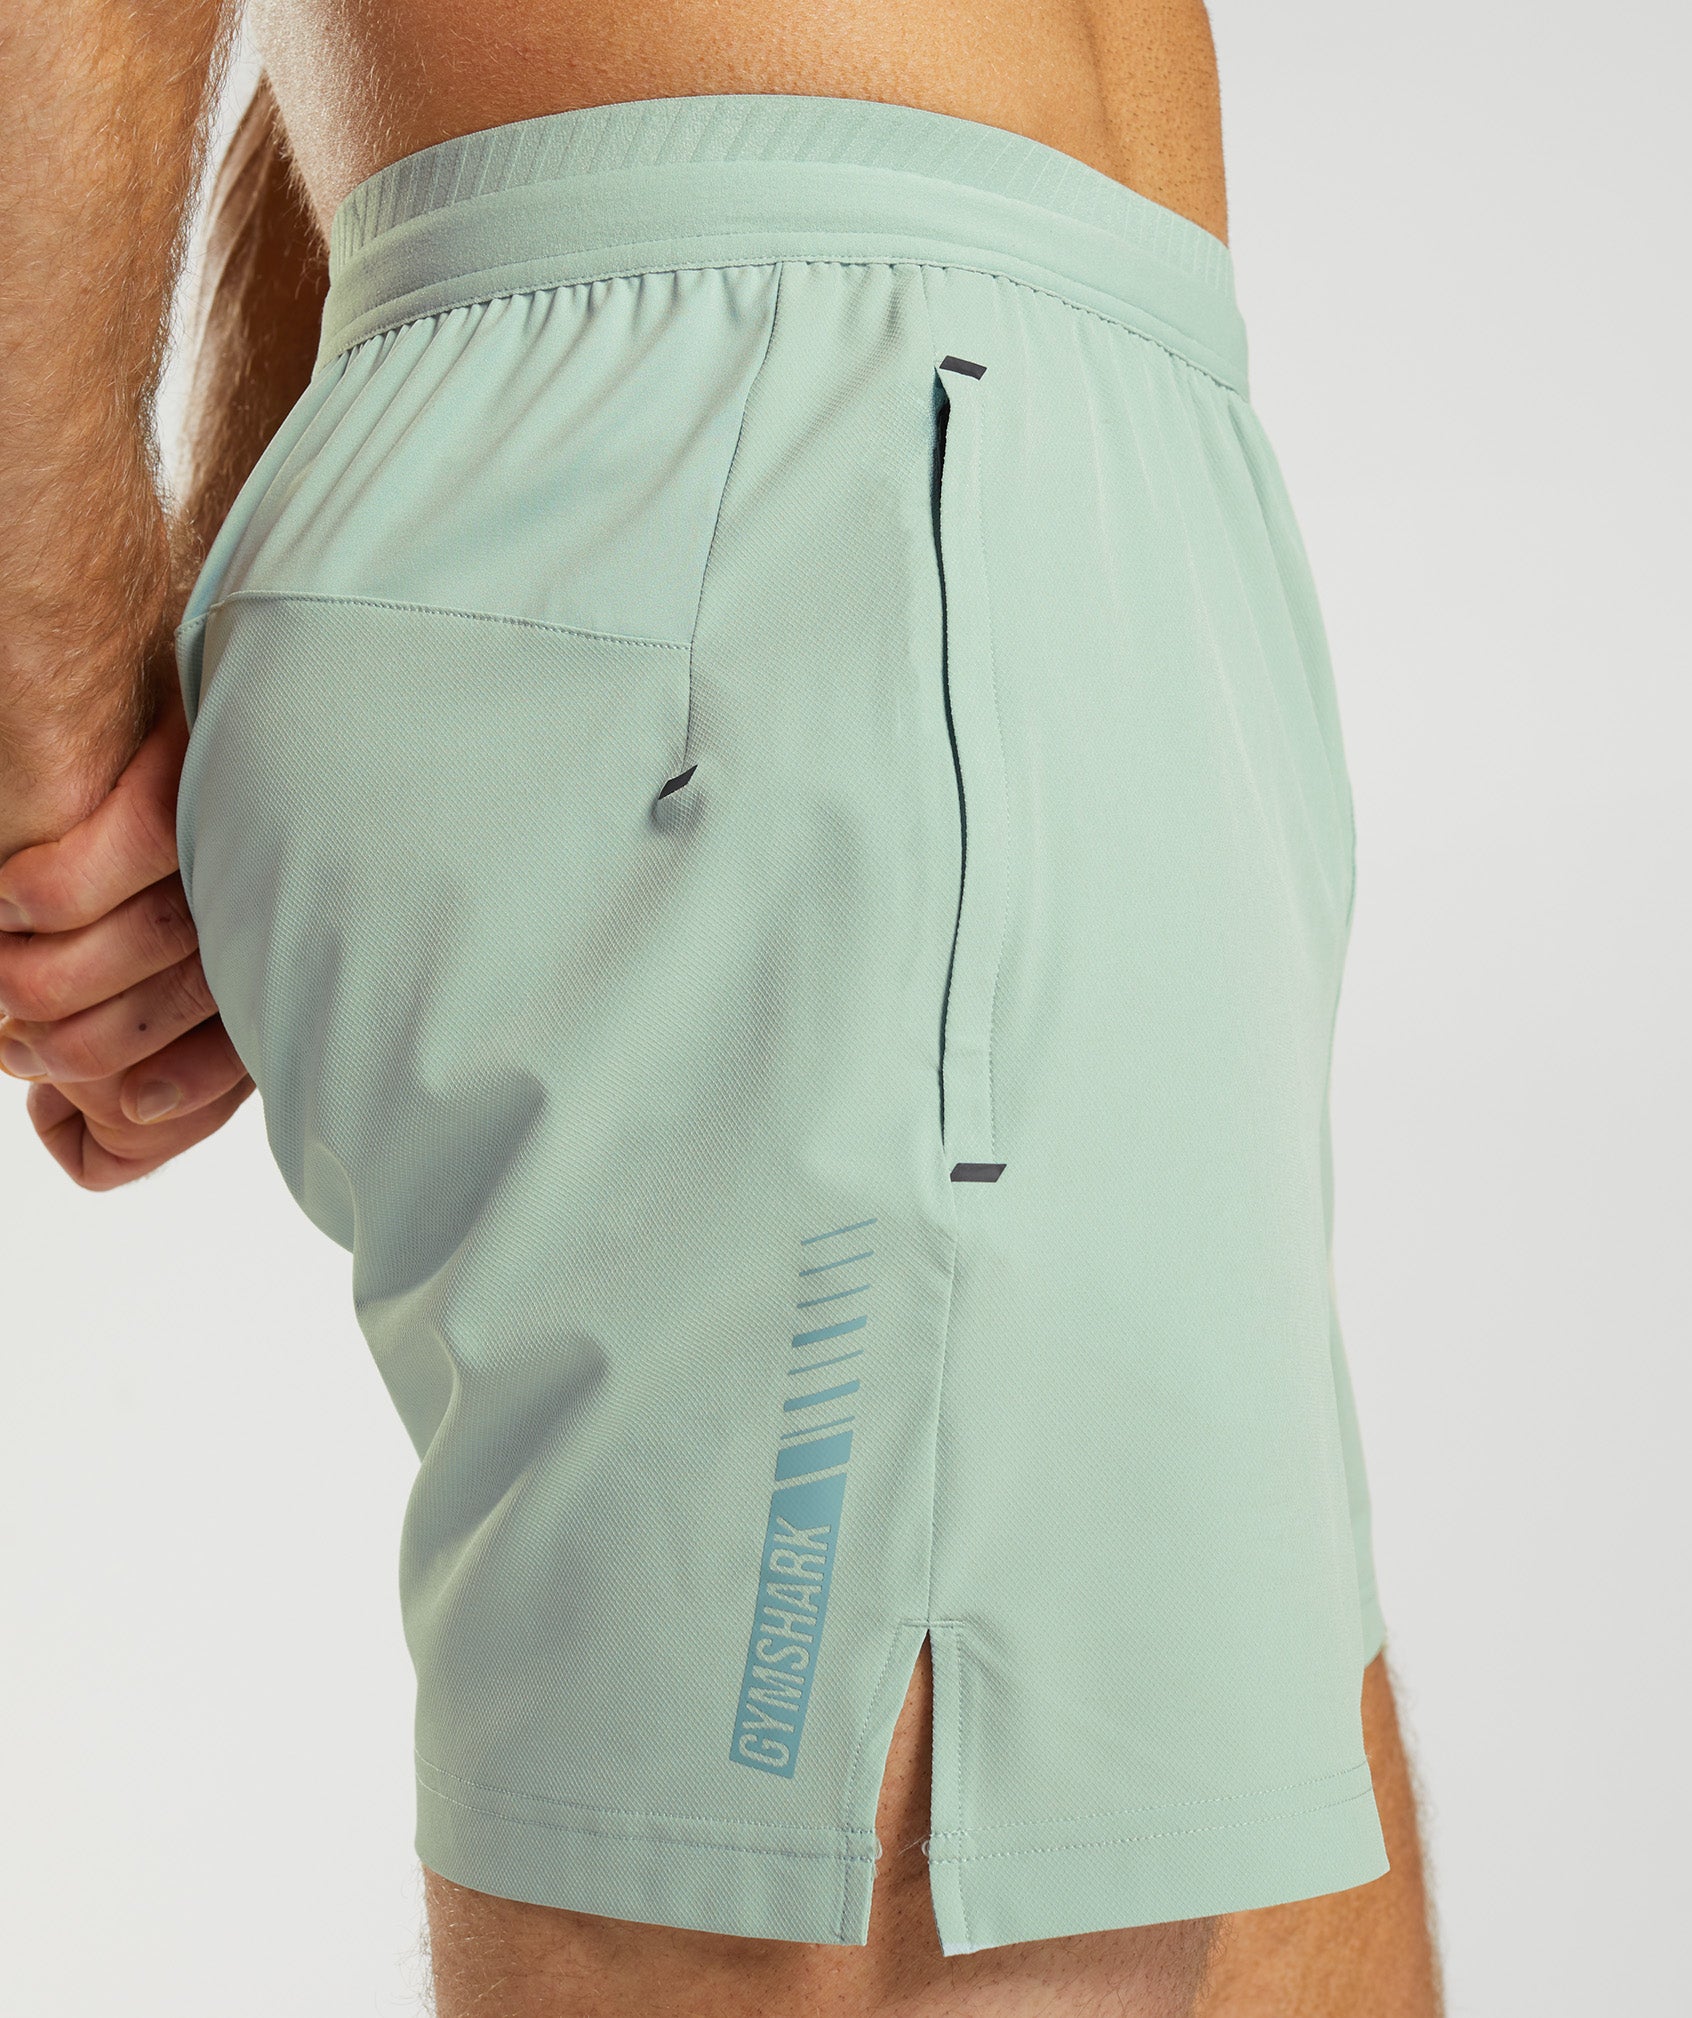 Apex 5" Hybrid Shorts in Frost Teal - view 5